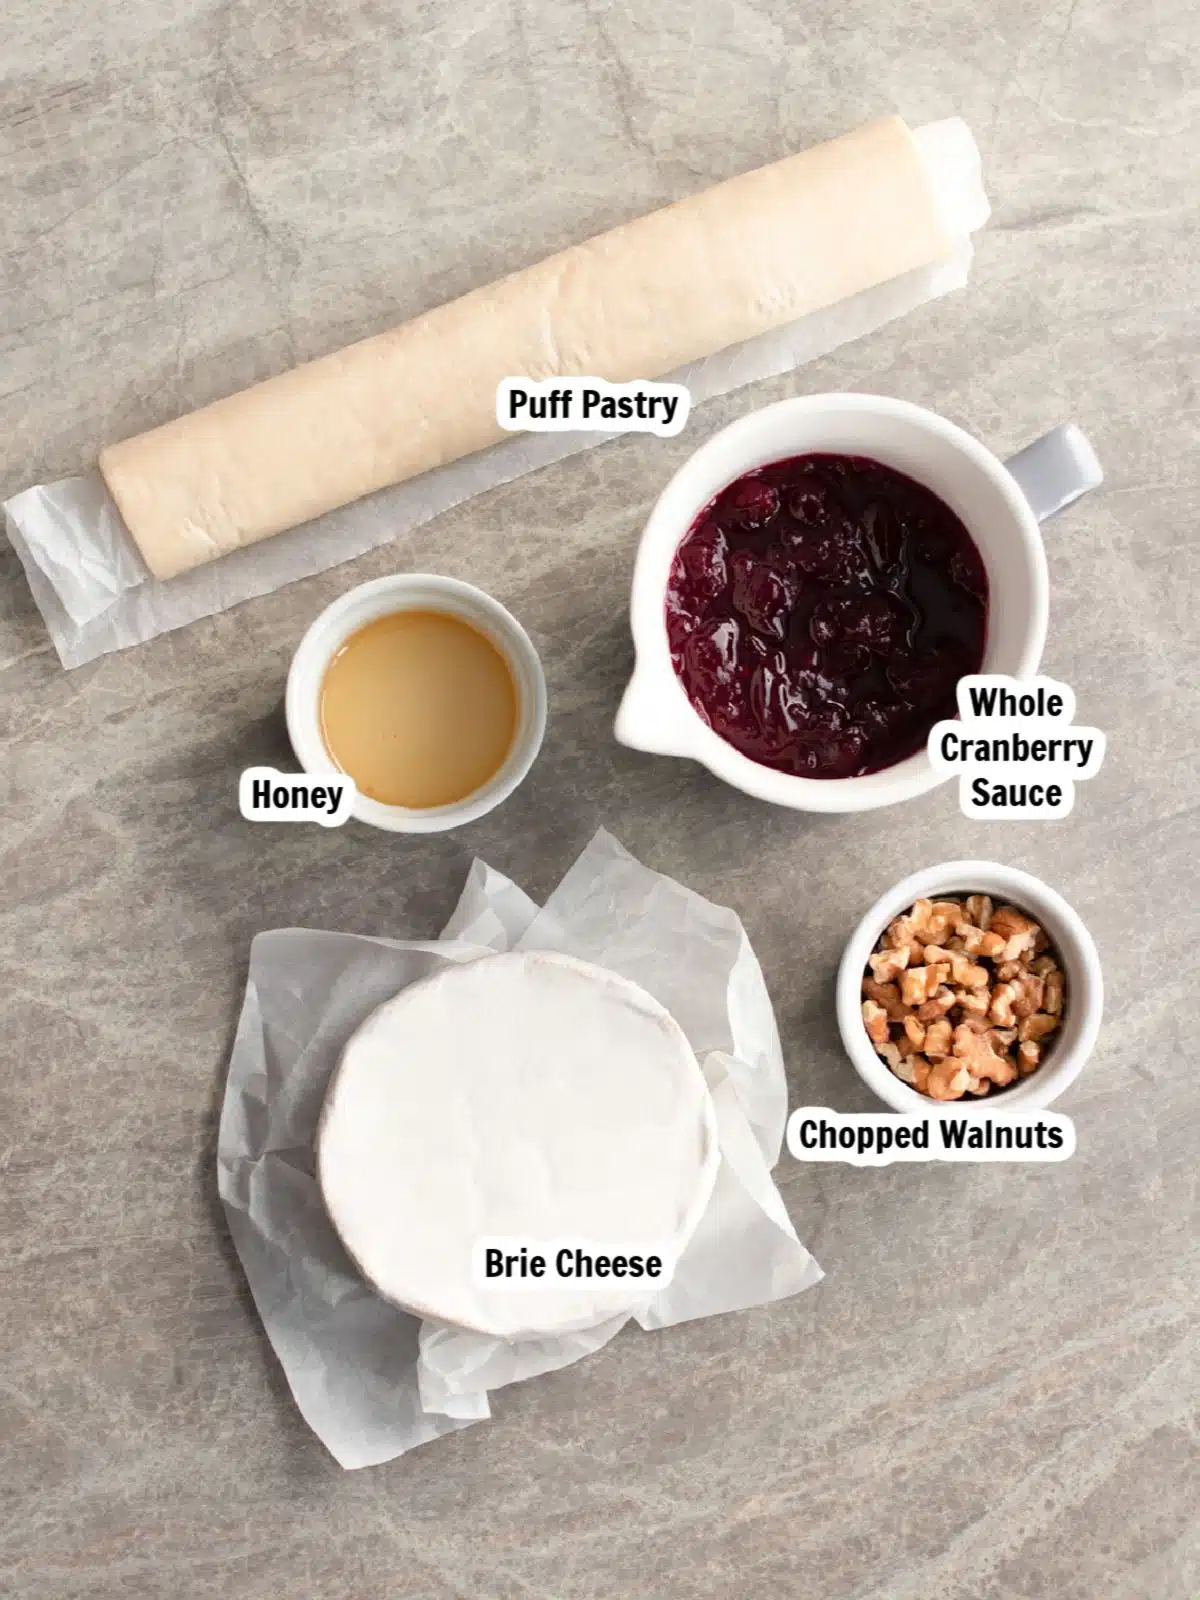 ingredients for puff pastry appetizer with brie cheese.